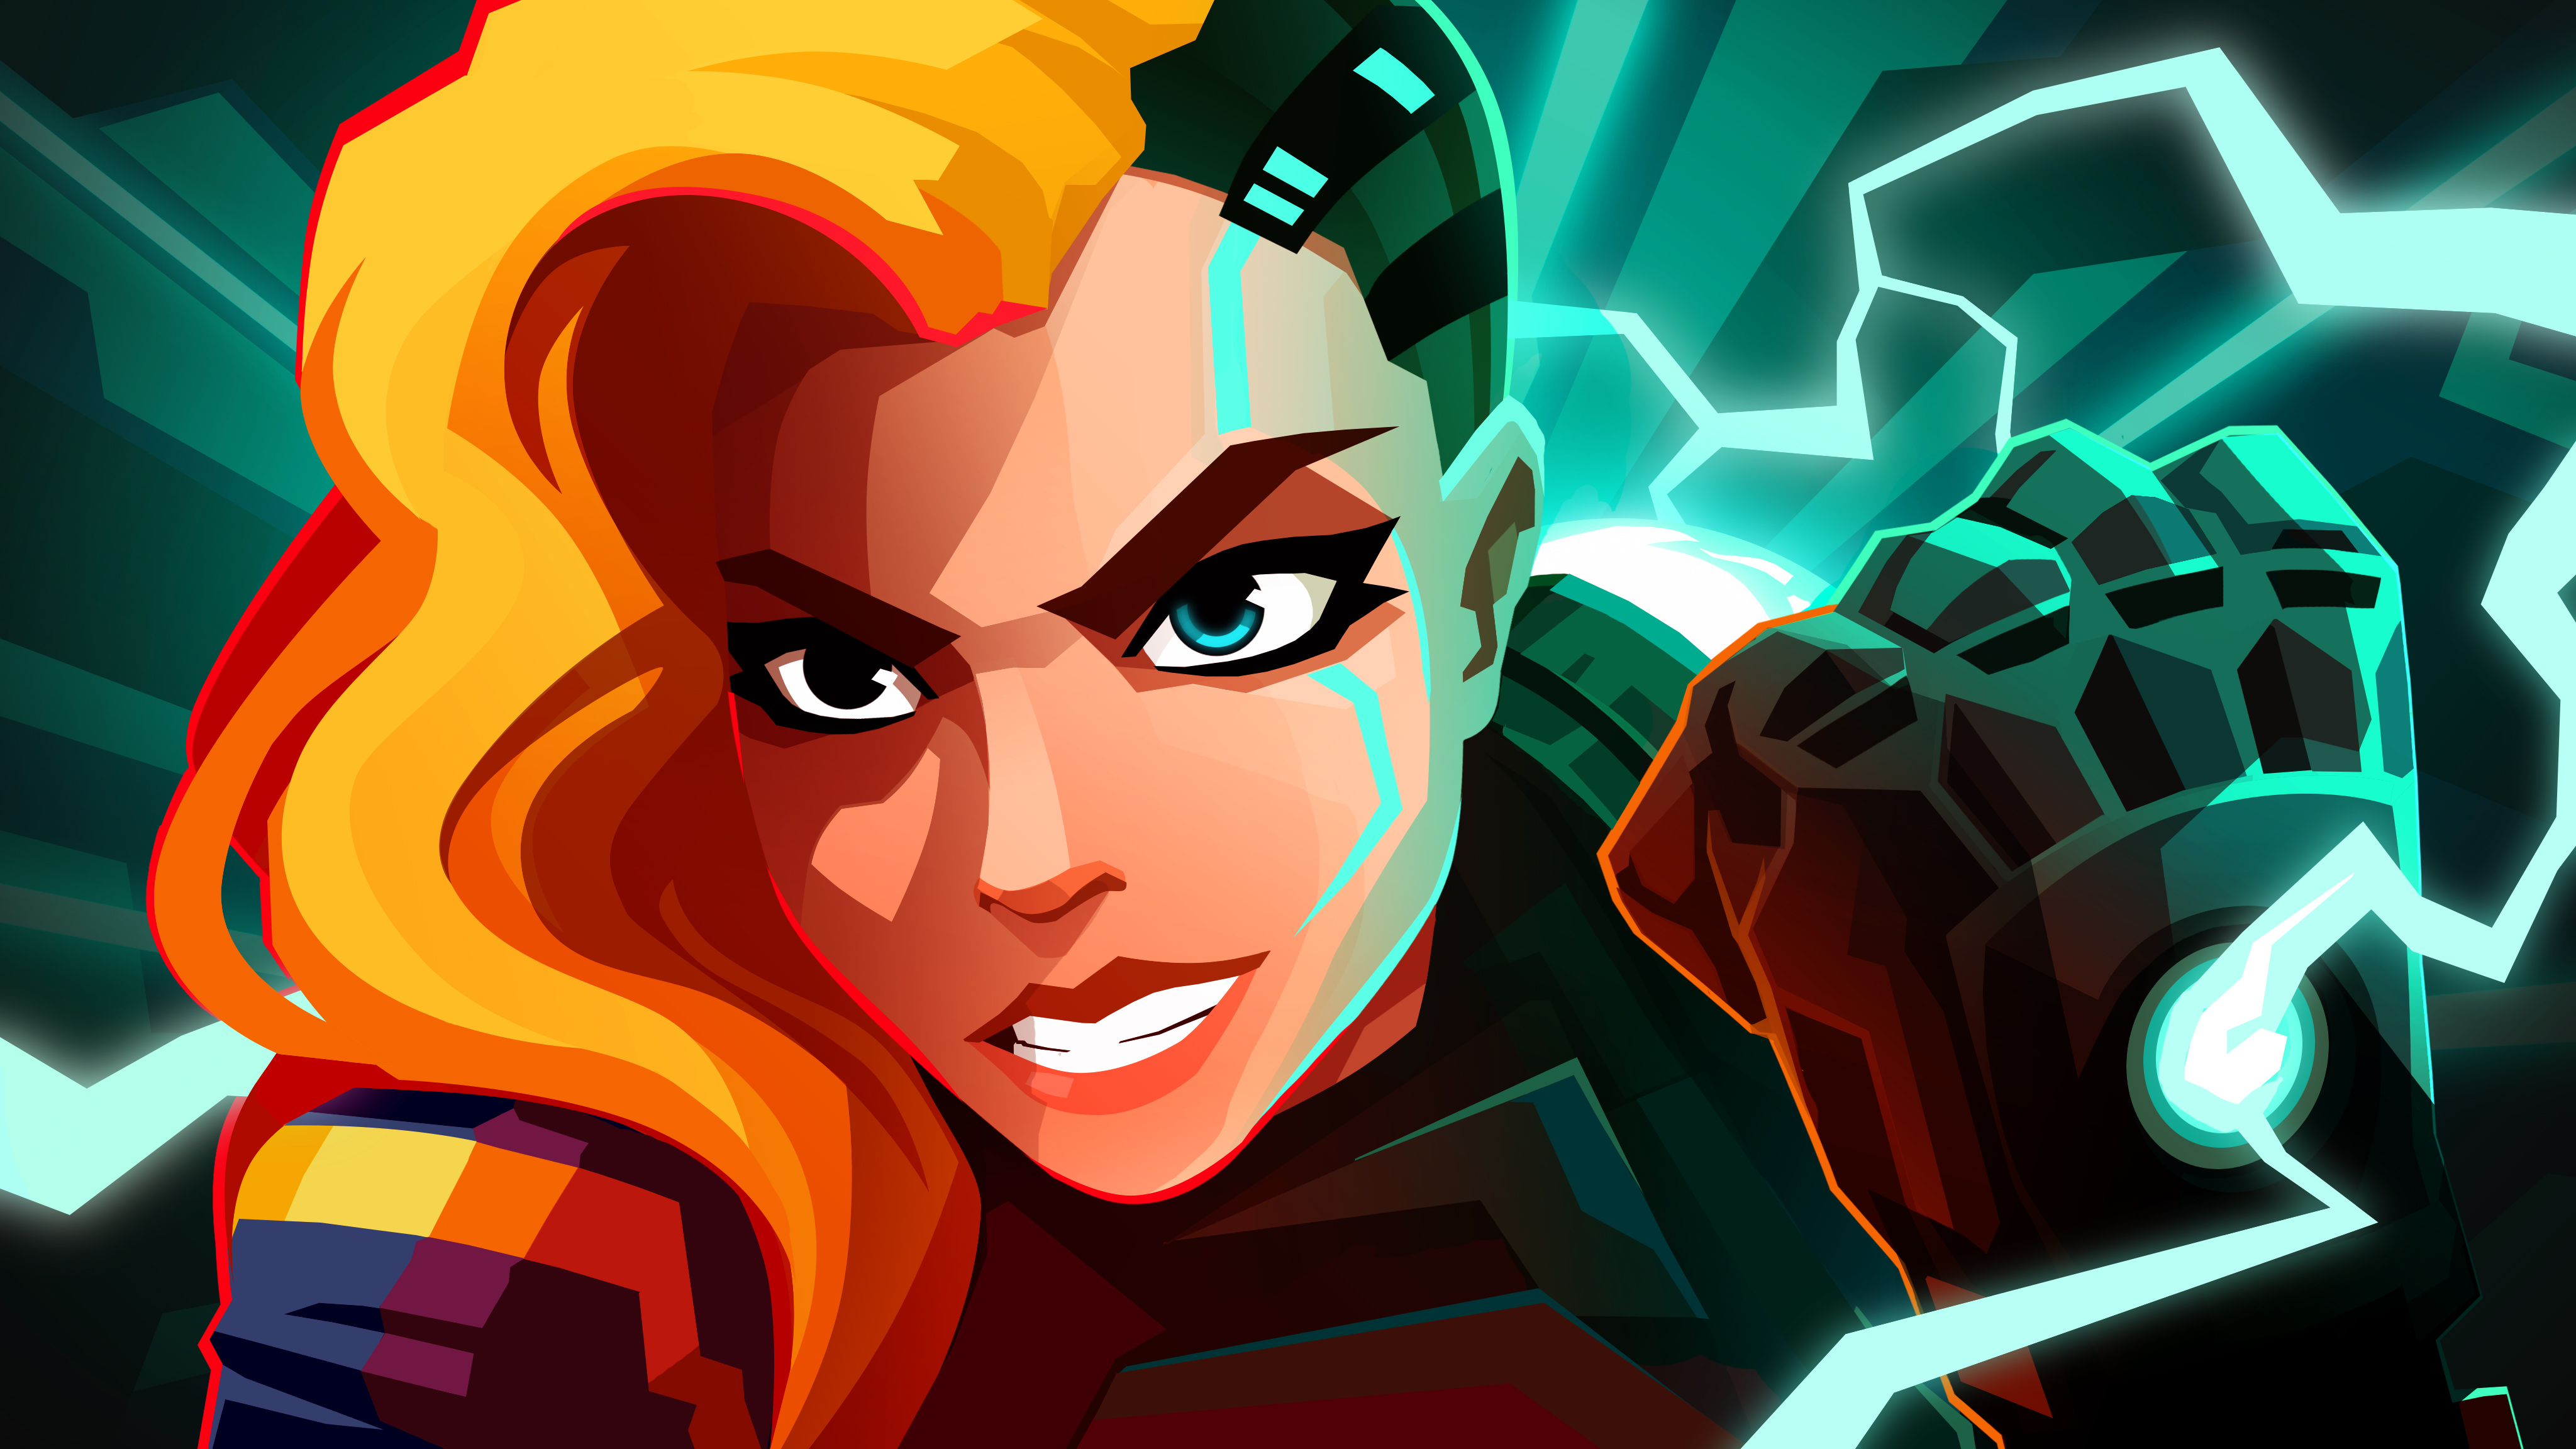 HQ Velocity 2X Wallpapers | File 2380.69Kb